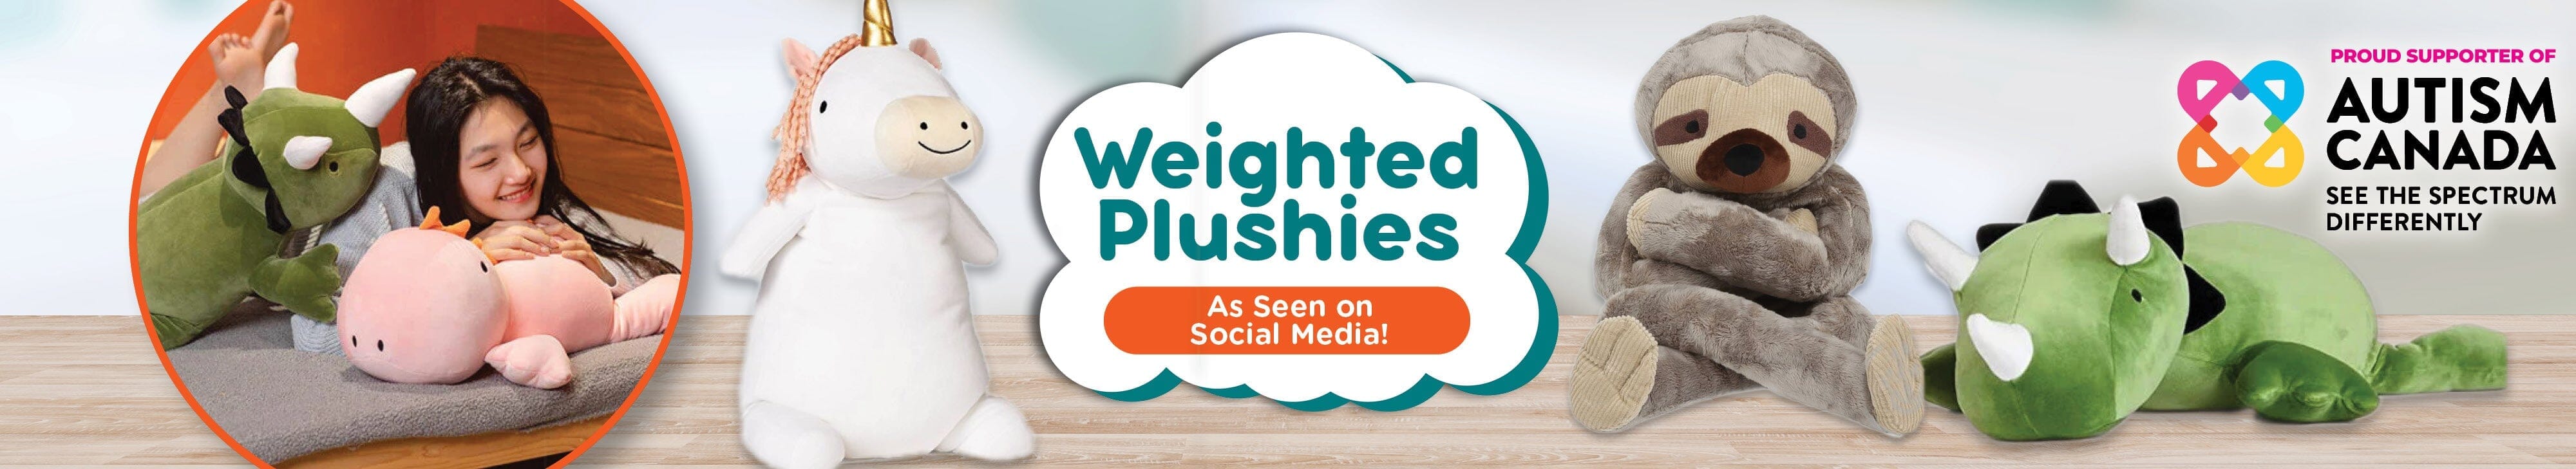 Weighted Plush Toys